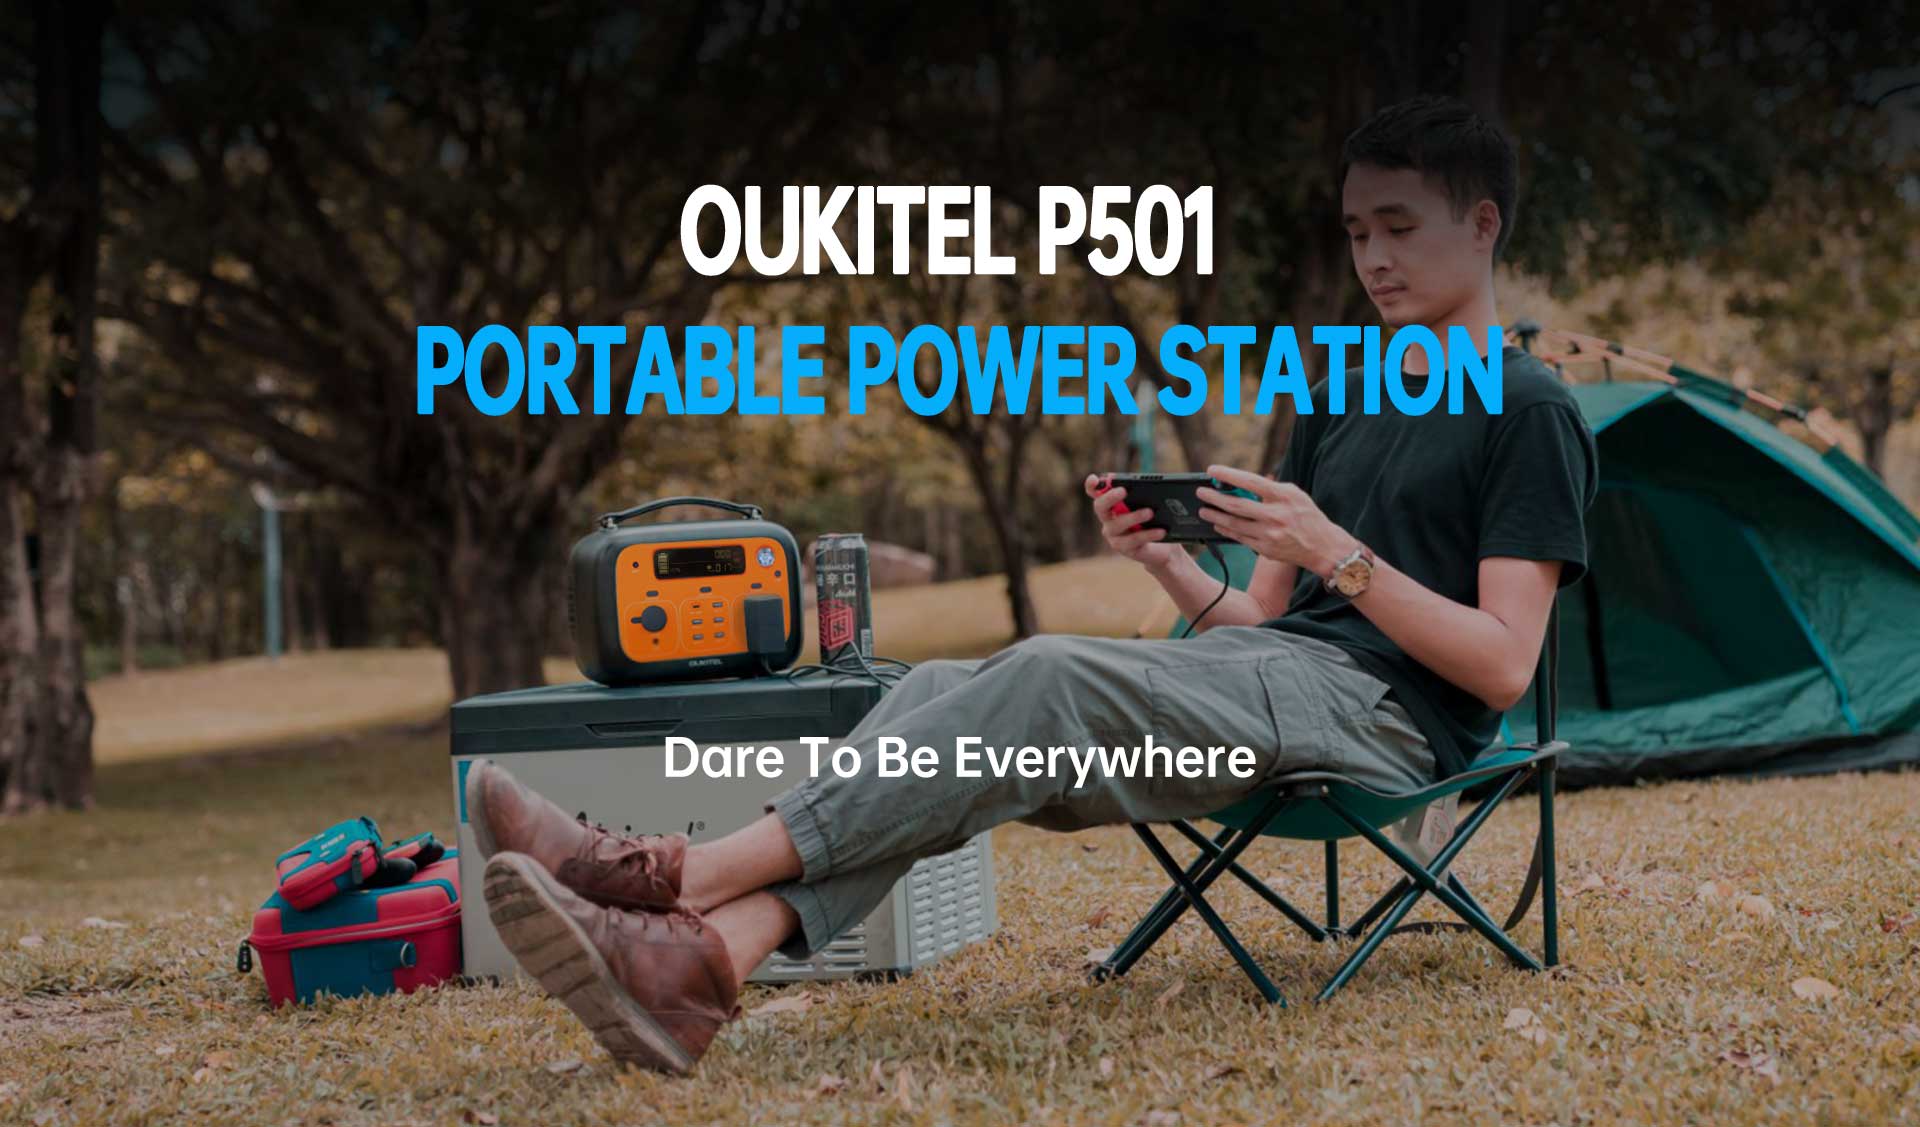 OUKITEL-505Wh-140400mAh-Emergency-Backup-Power-Station-Power-Bank-Generator-With-500W-AC-Power-Outle-1932186-1